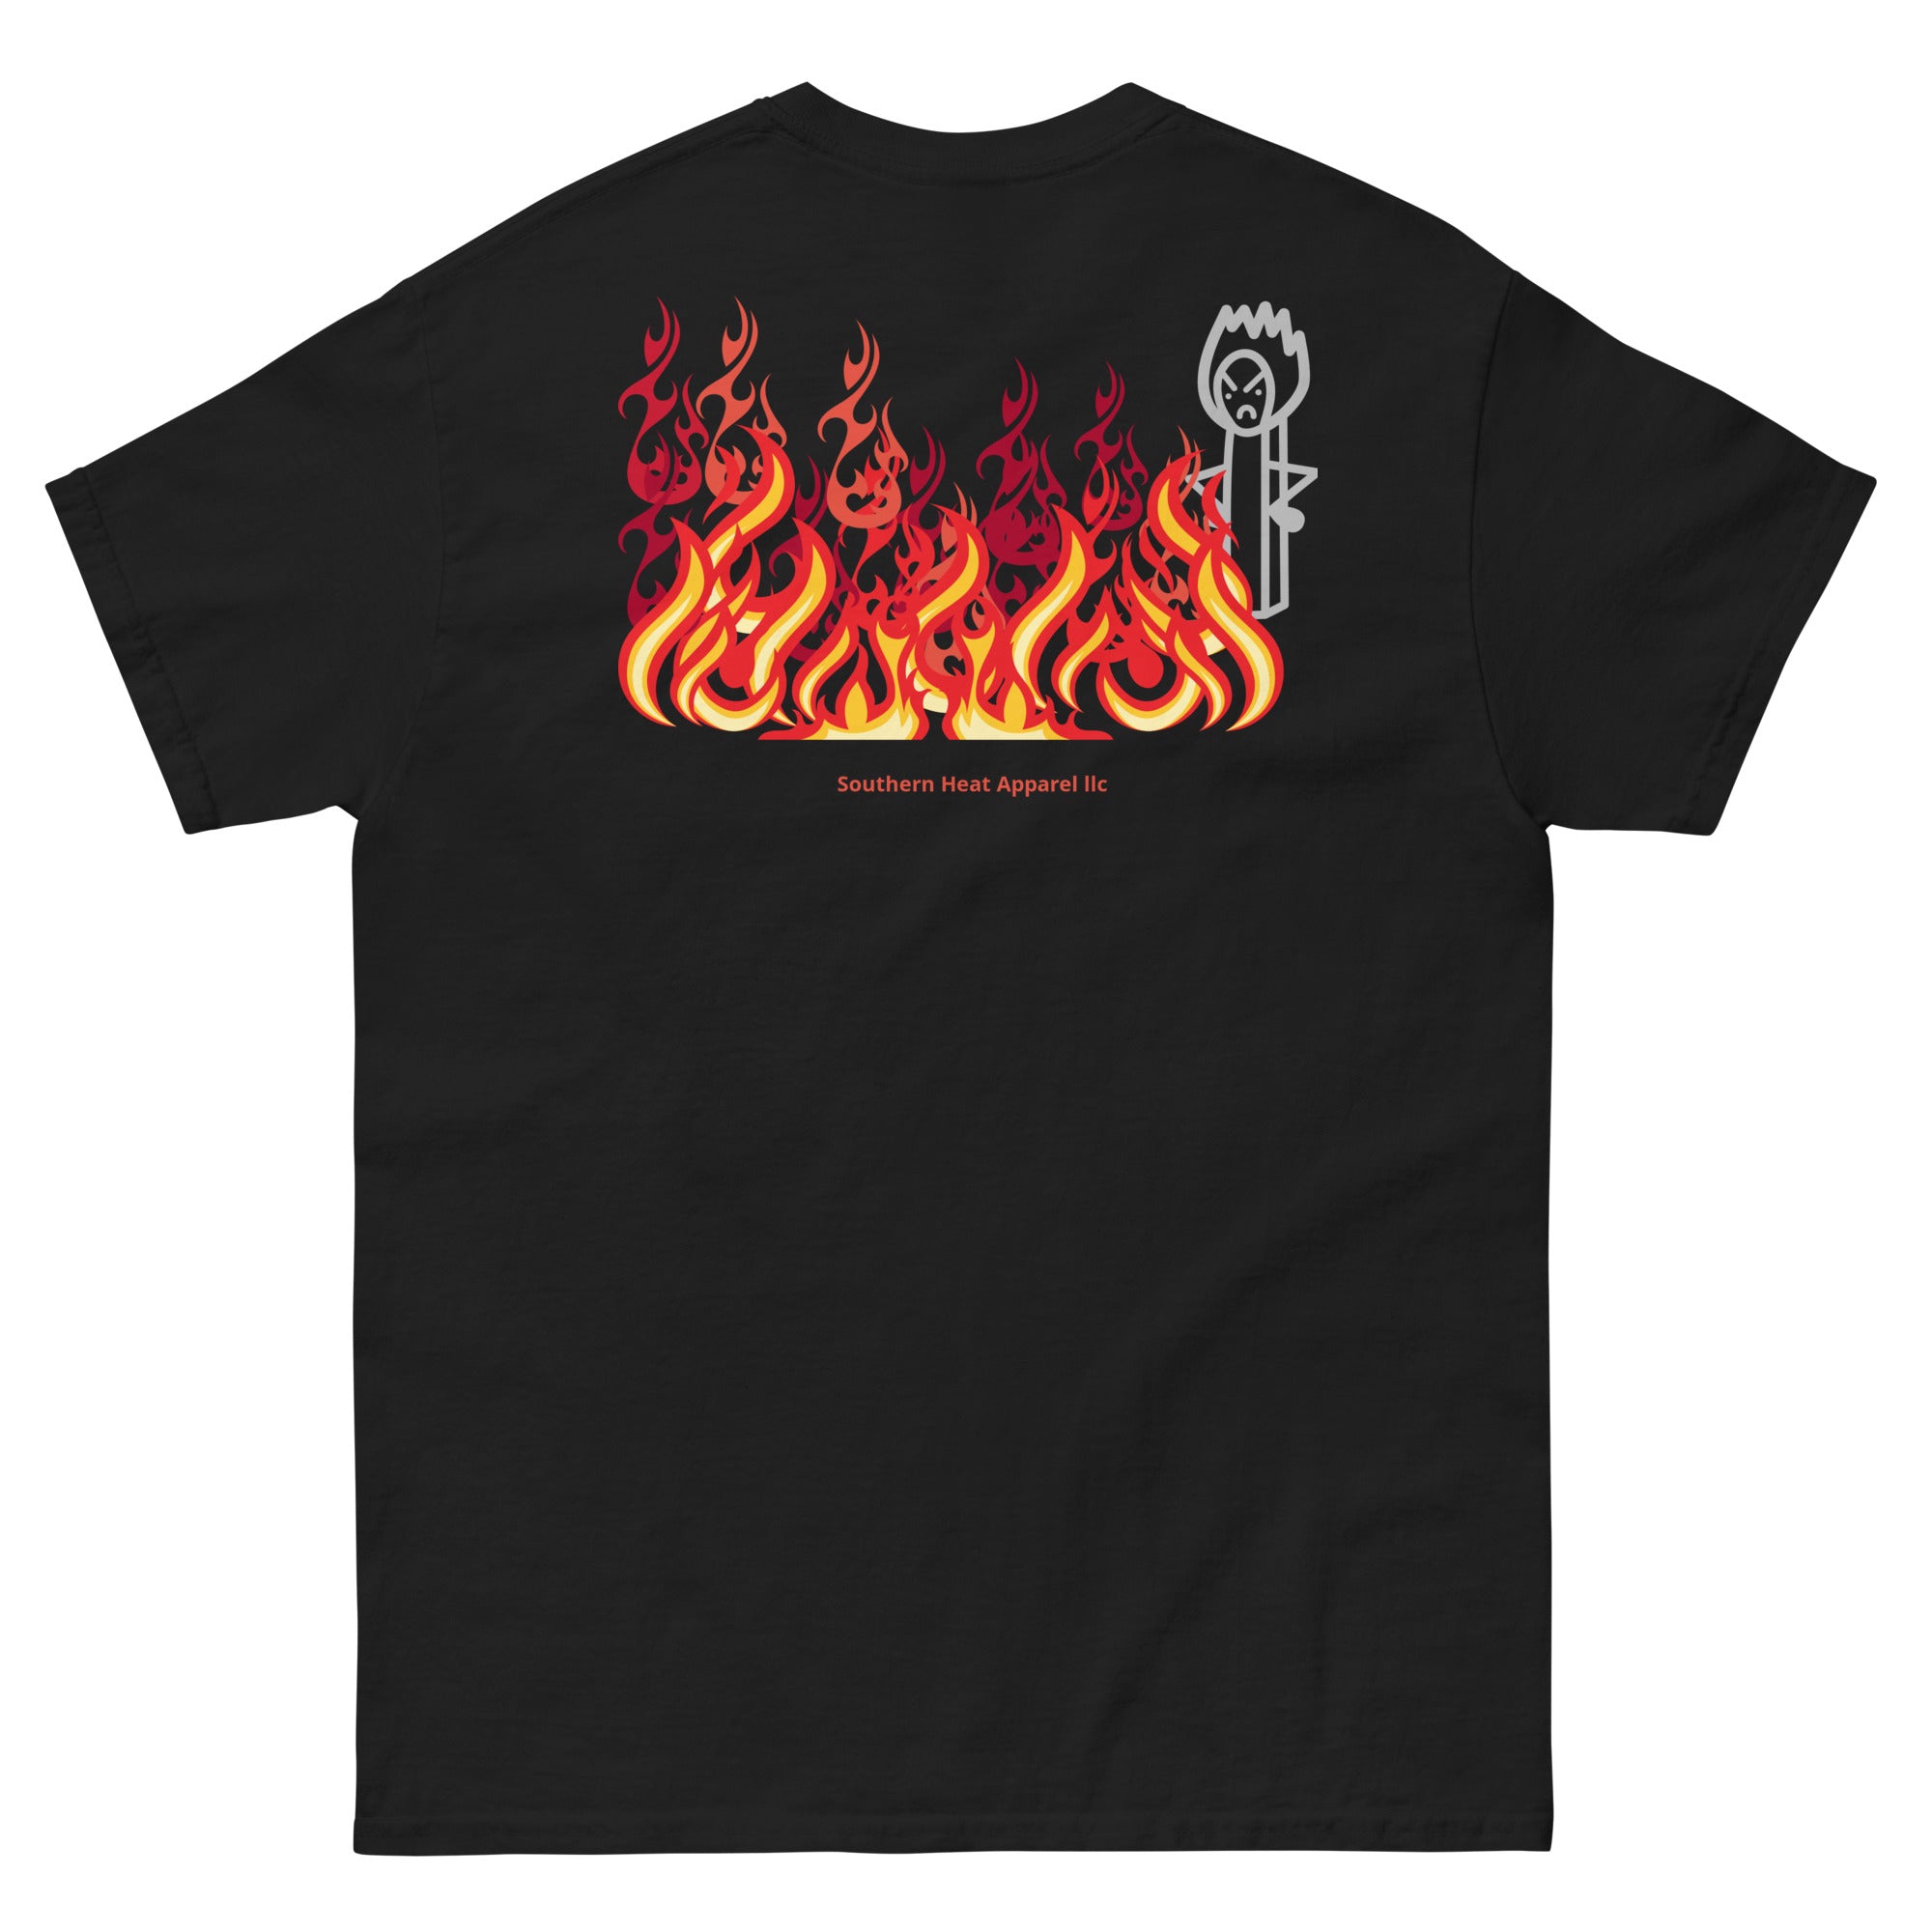 Angry Match-Men's classic tee